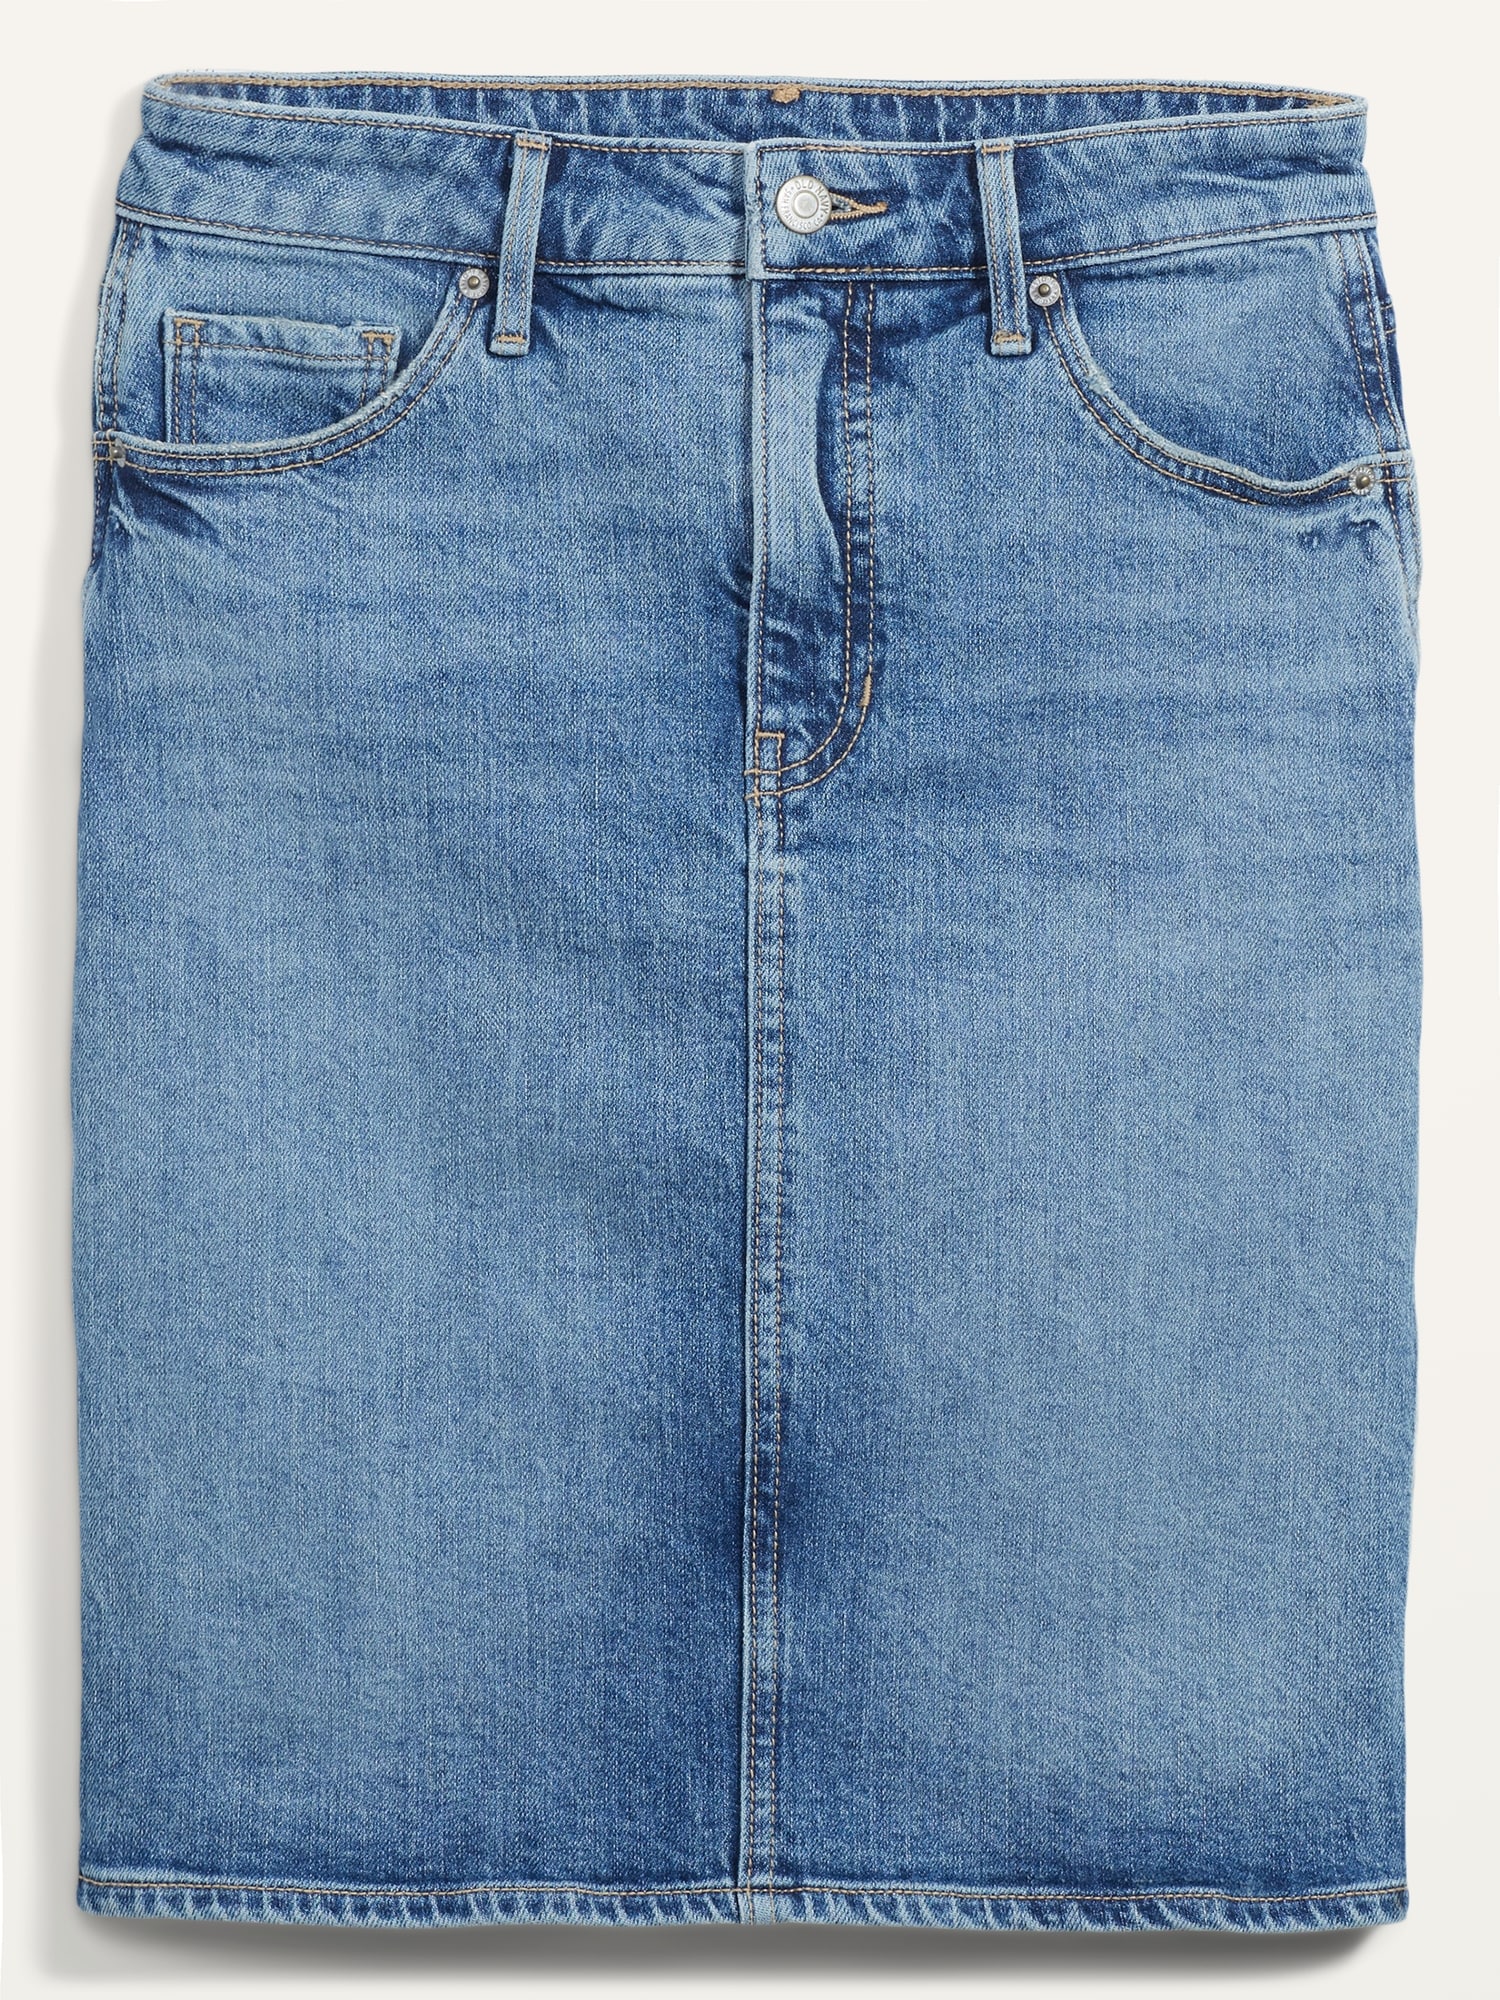 Extra High-Waisted Jean Midi Skirt for Women | Old Navy